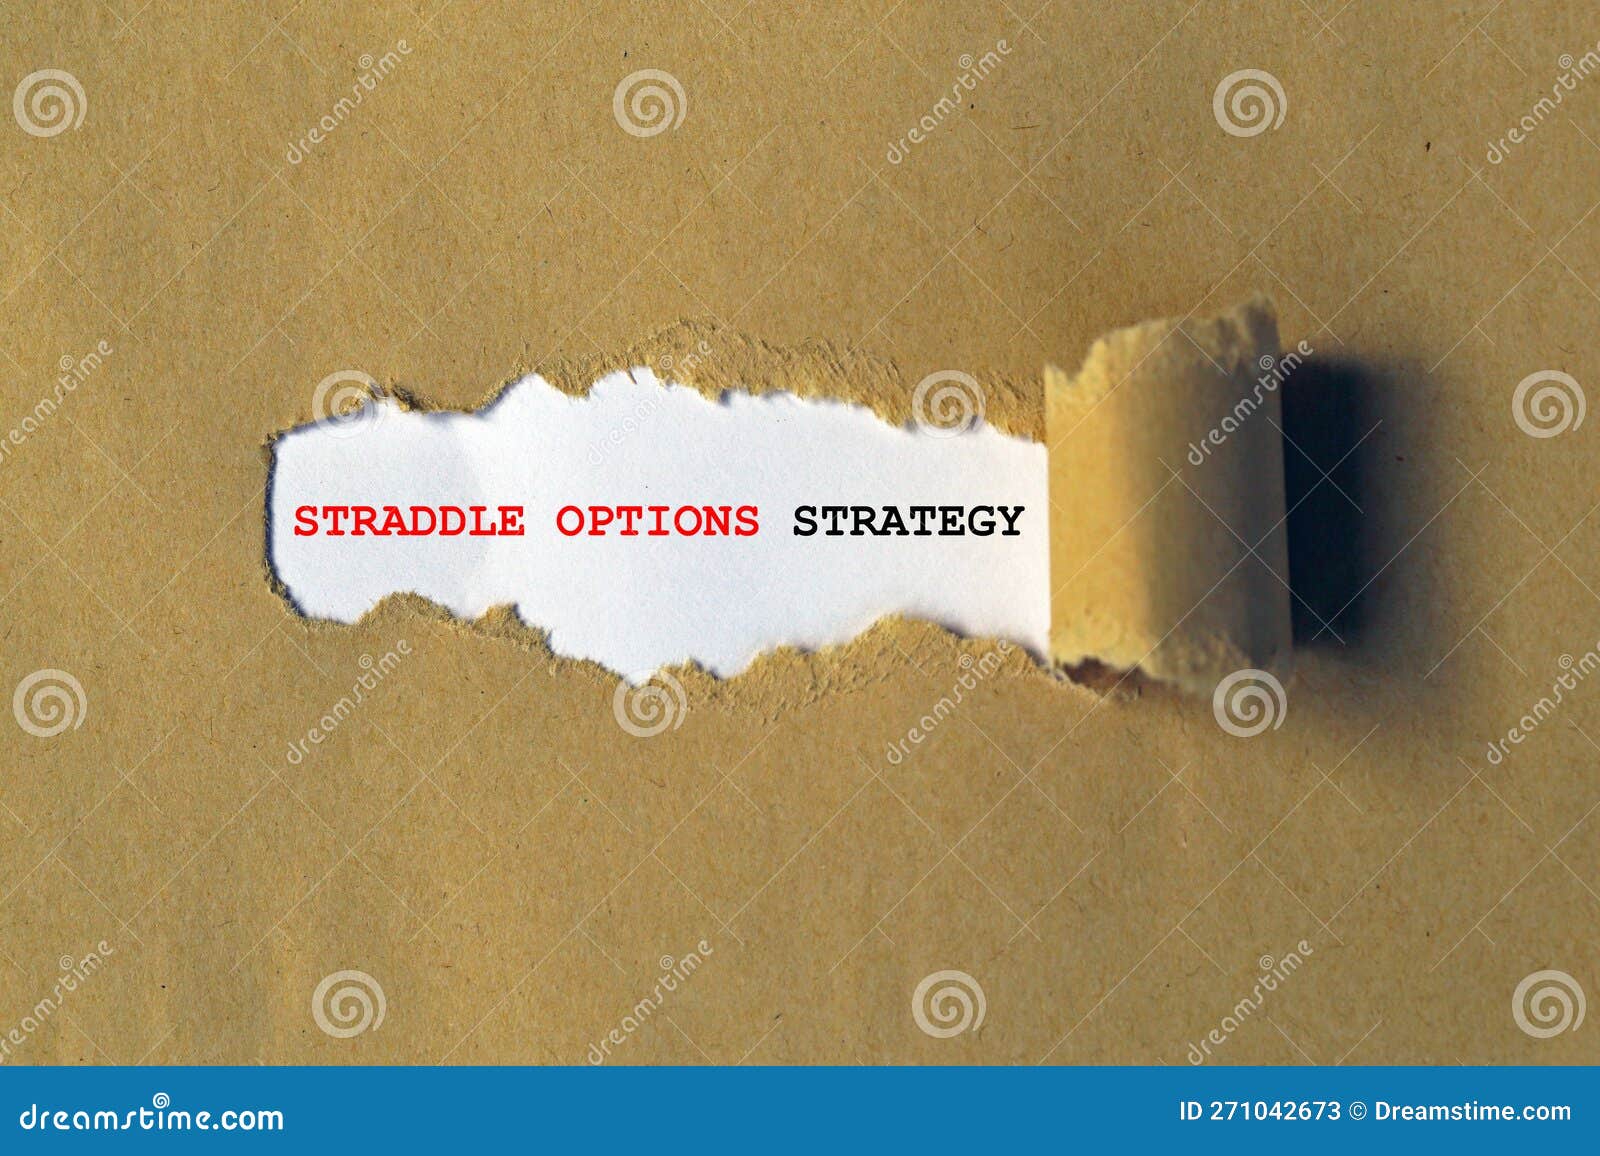 straddle options strategy on paper